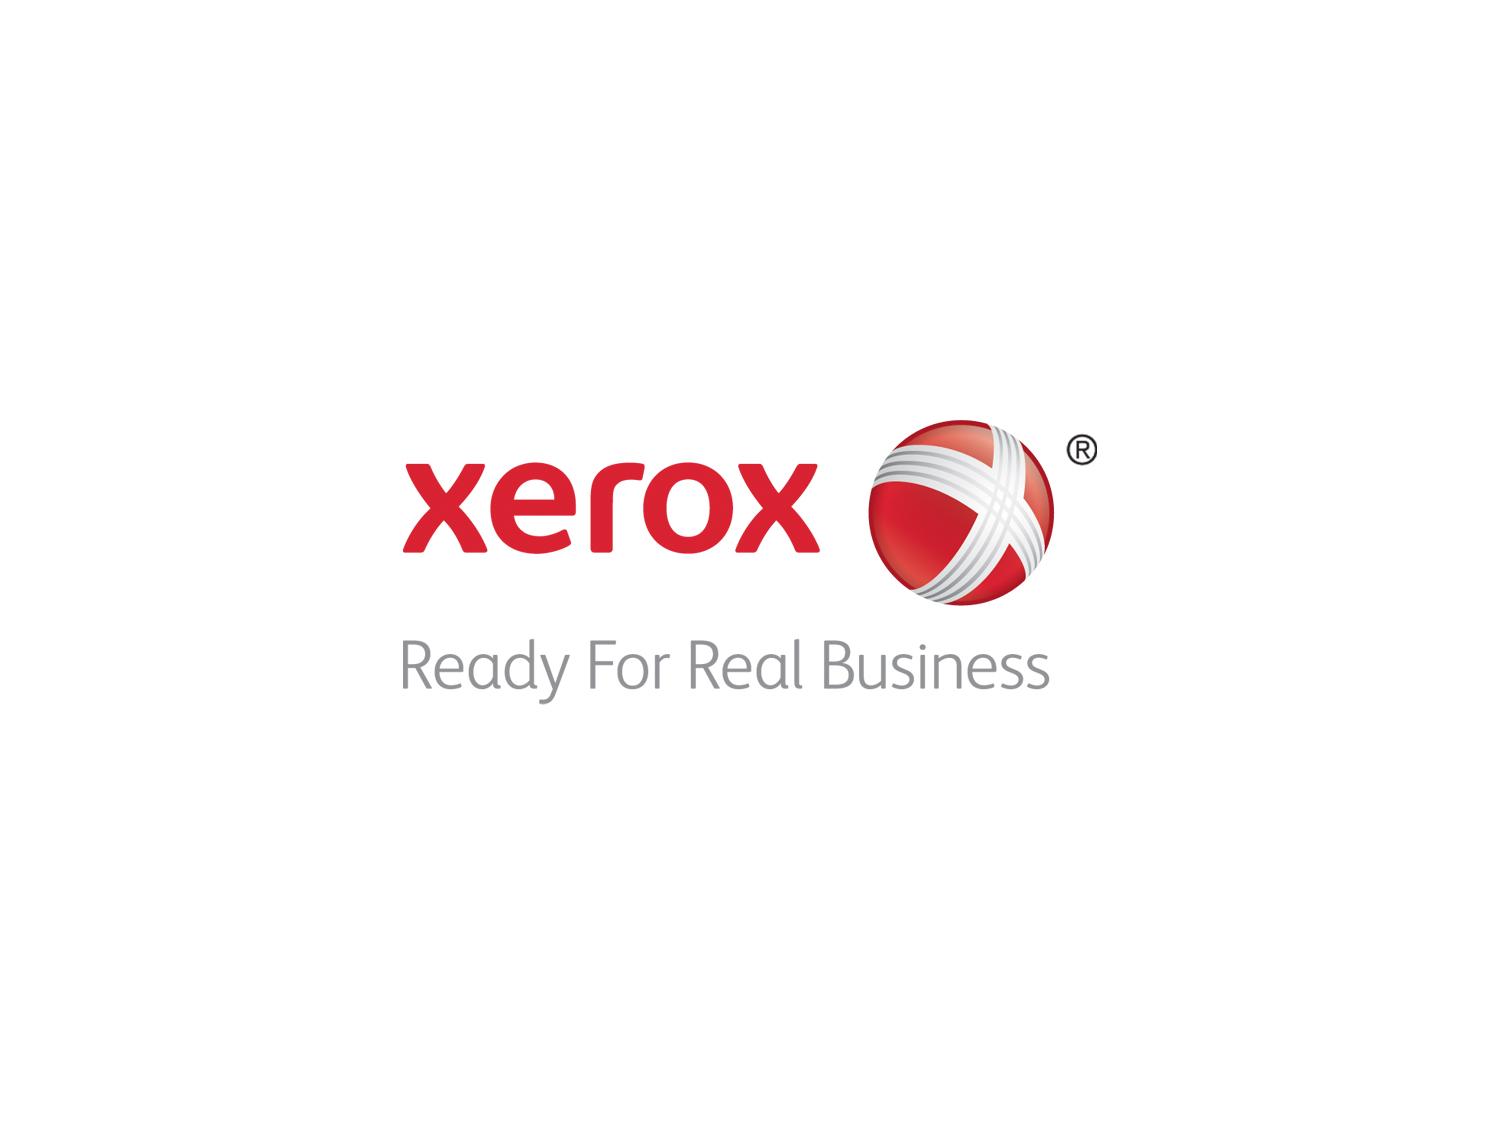 2014 Xerox Corporation. All rights reserved.